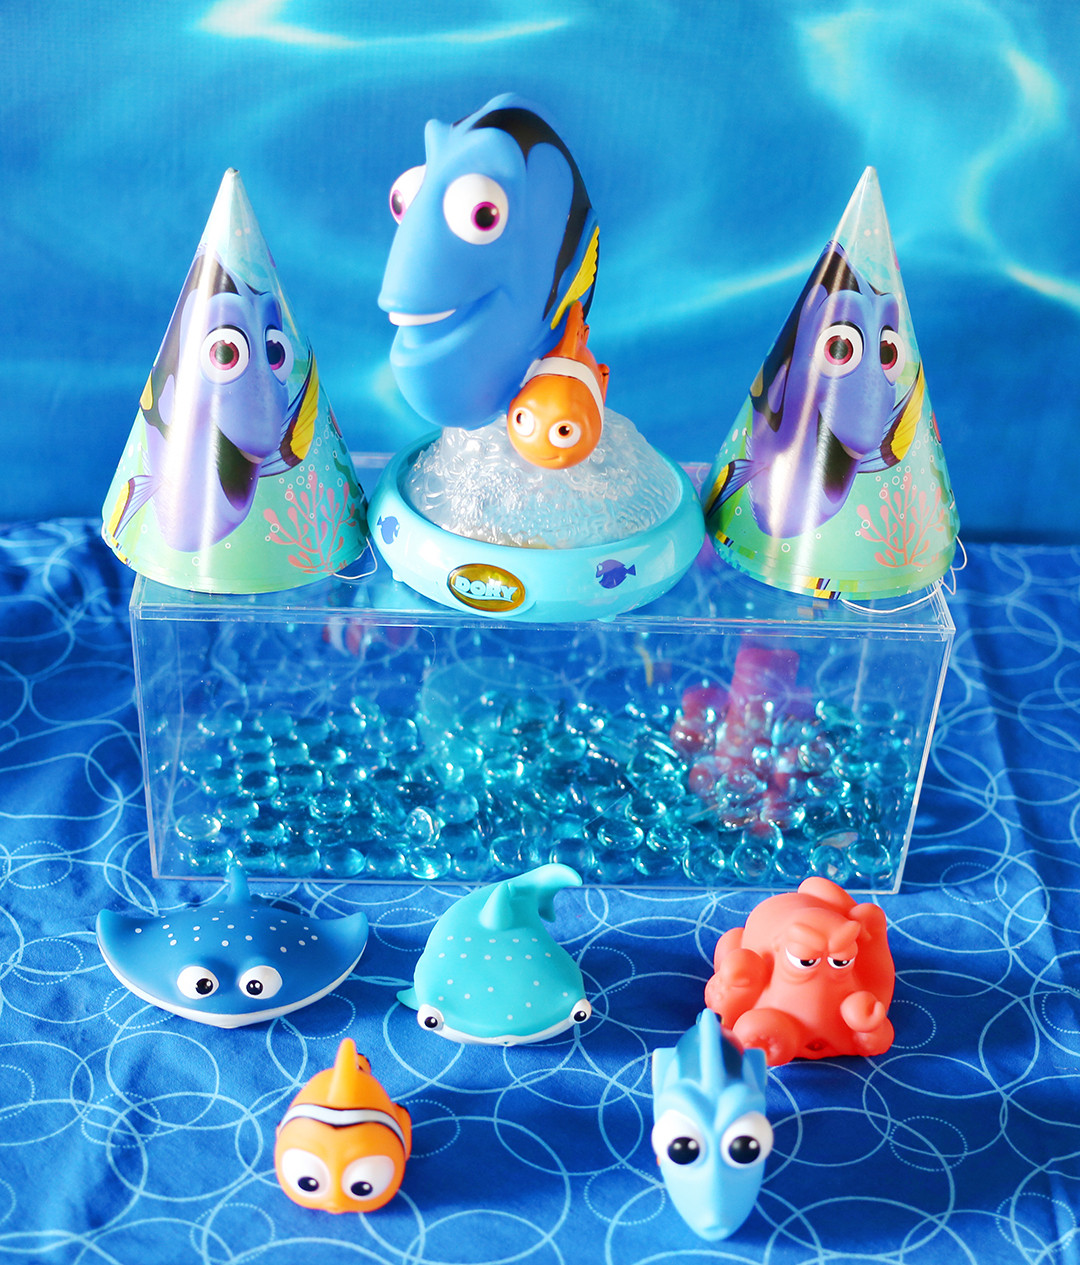 Finding Dory Pool Party Ideas
 DIY Finding Dory Inspired Party Game